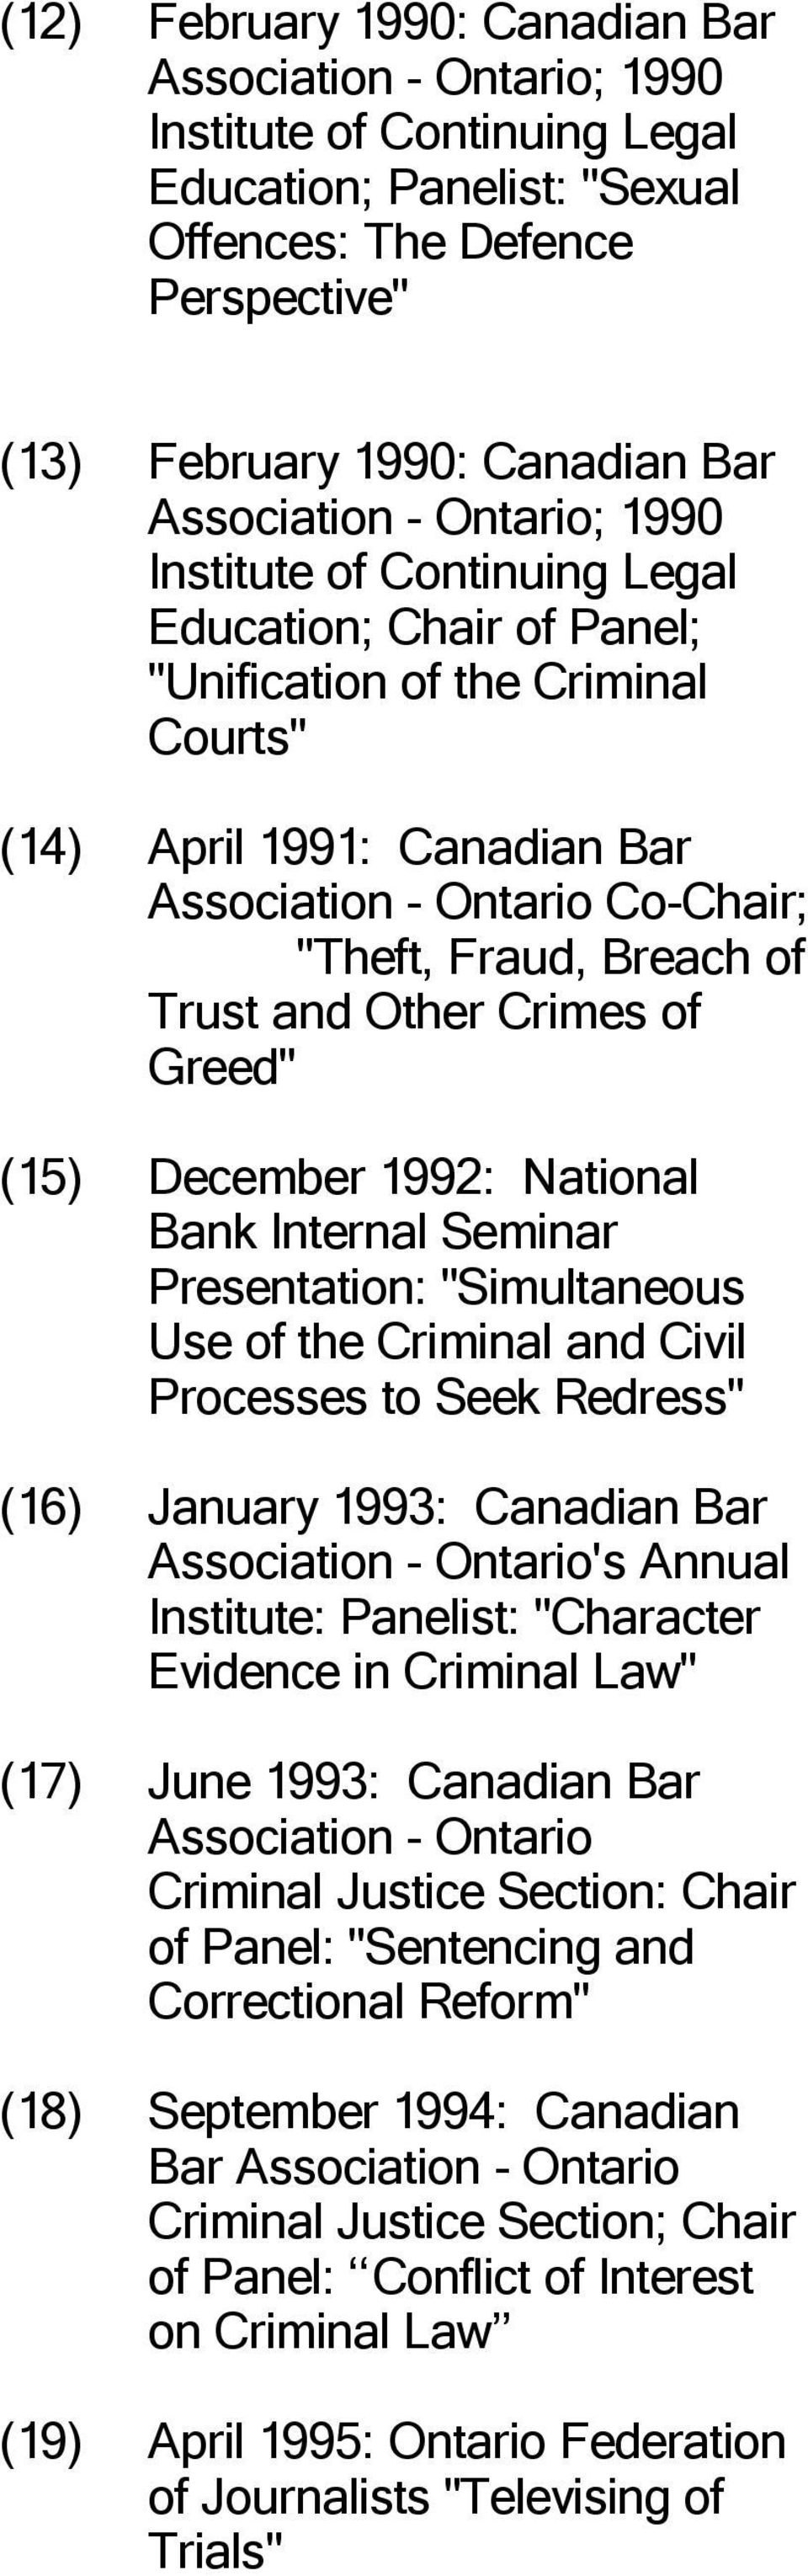 Trust and Other Crimes of Greed" (15) December 1992: National Bank Internal Seminar Presentation: "Simultaneous Use of the Criminal and Civil Processes to Seek Redress" (16) January 1993: Canadian